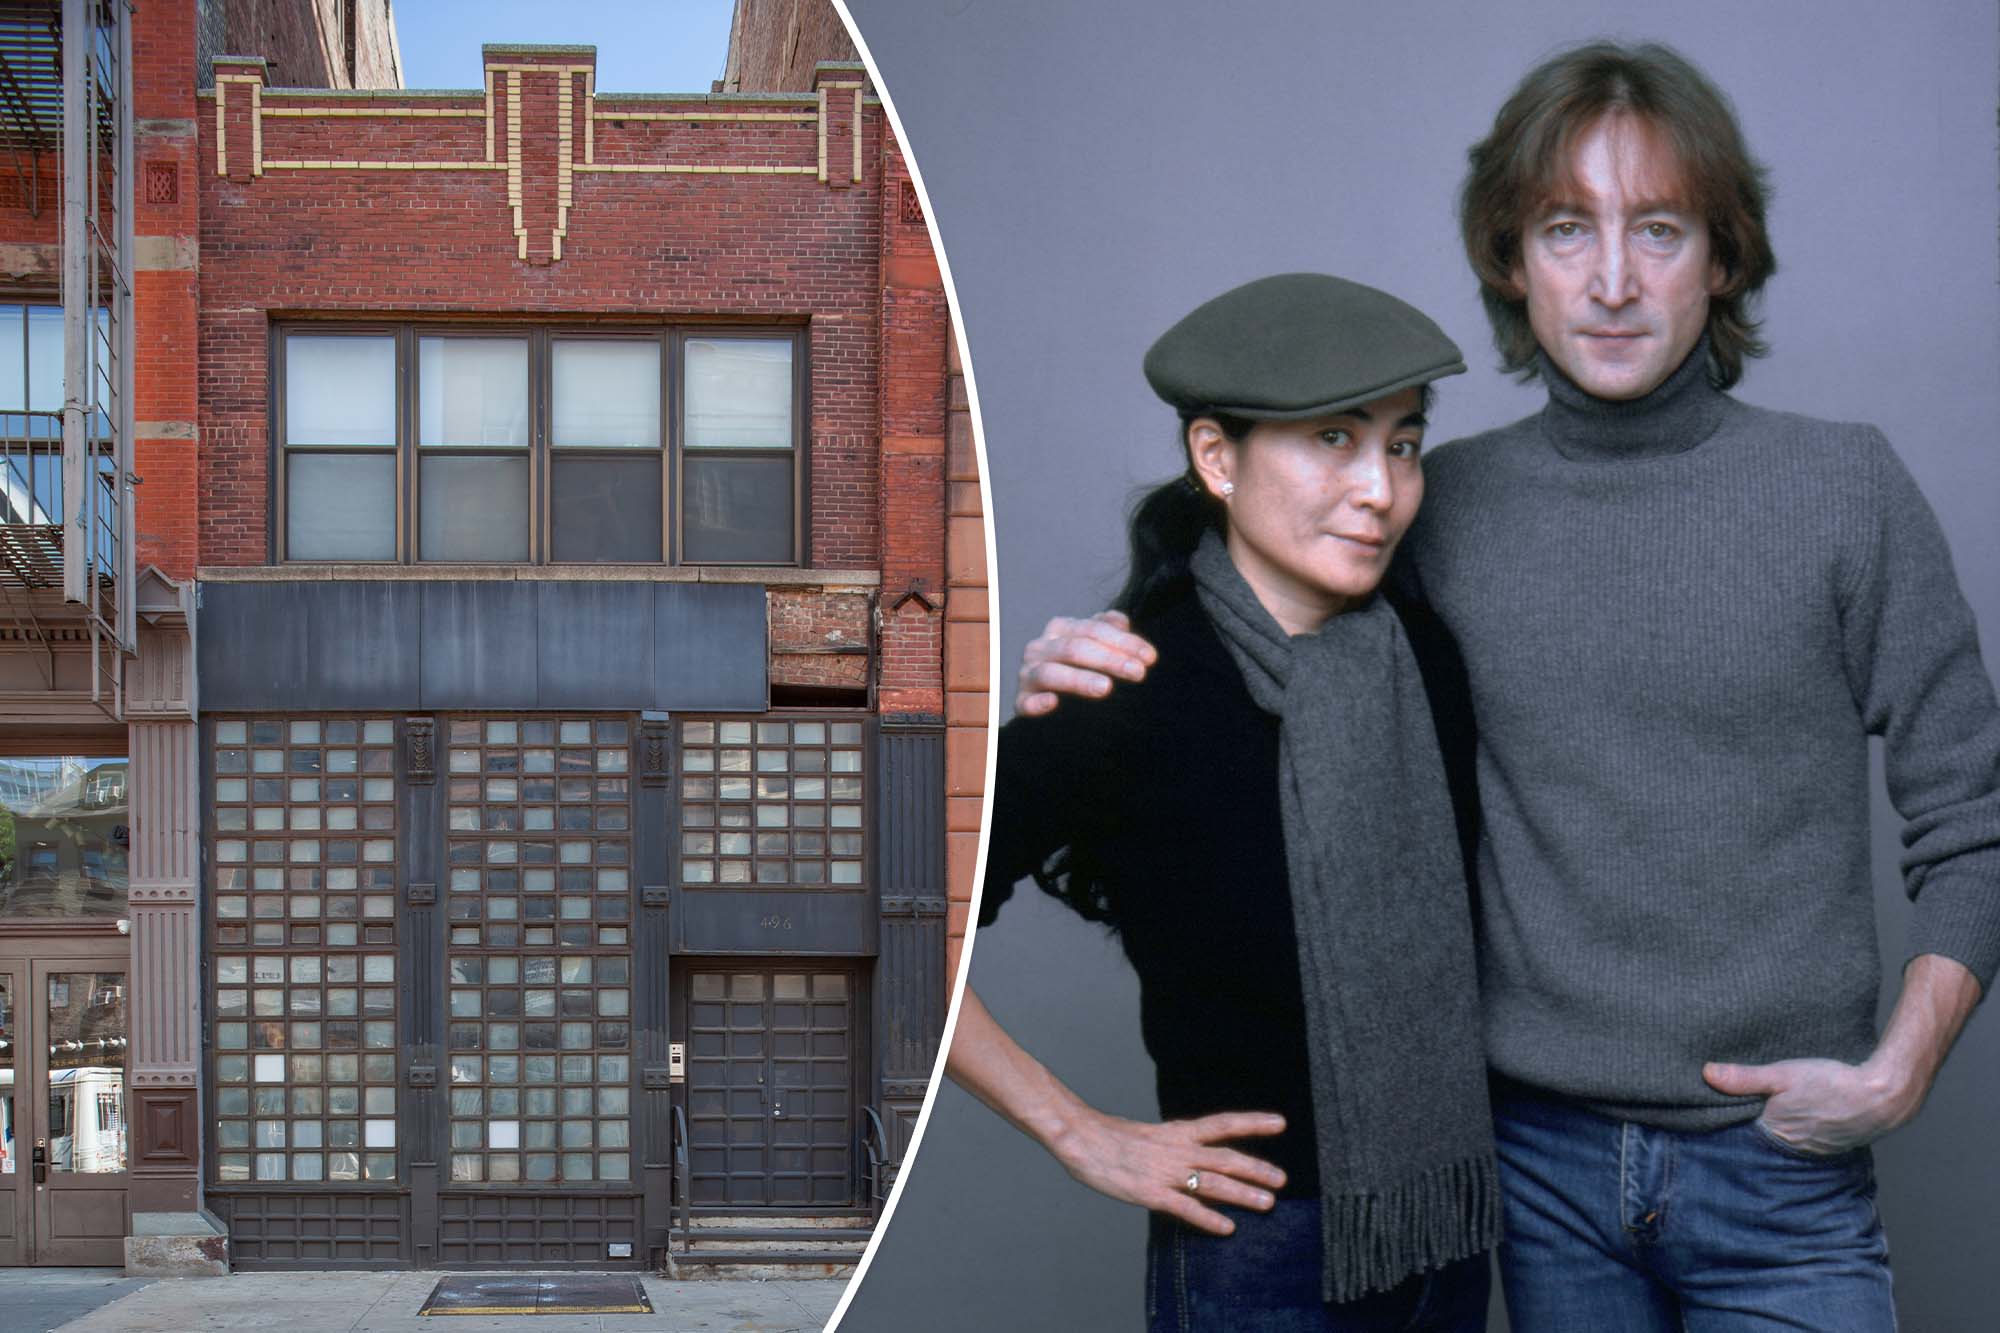 Yoko Ono lists first NYC home she shared with John Lennon for $5.5M